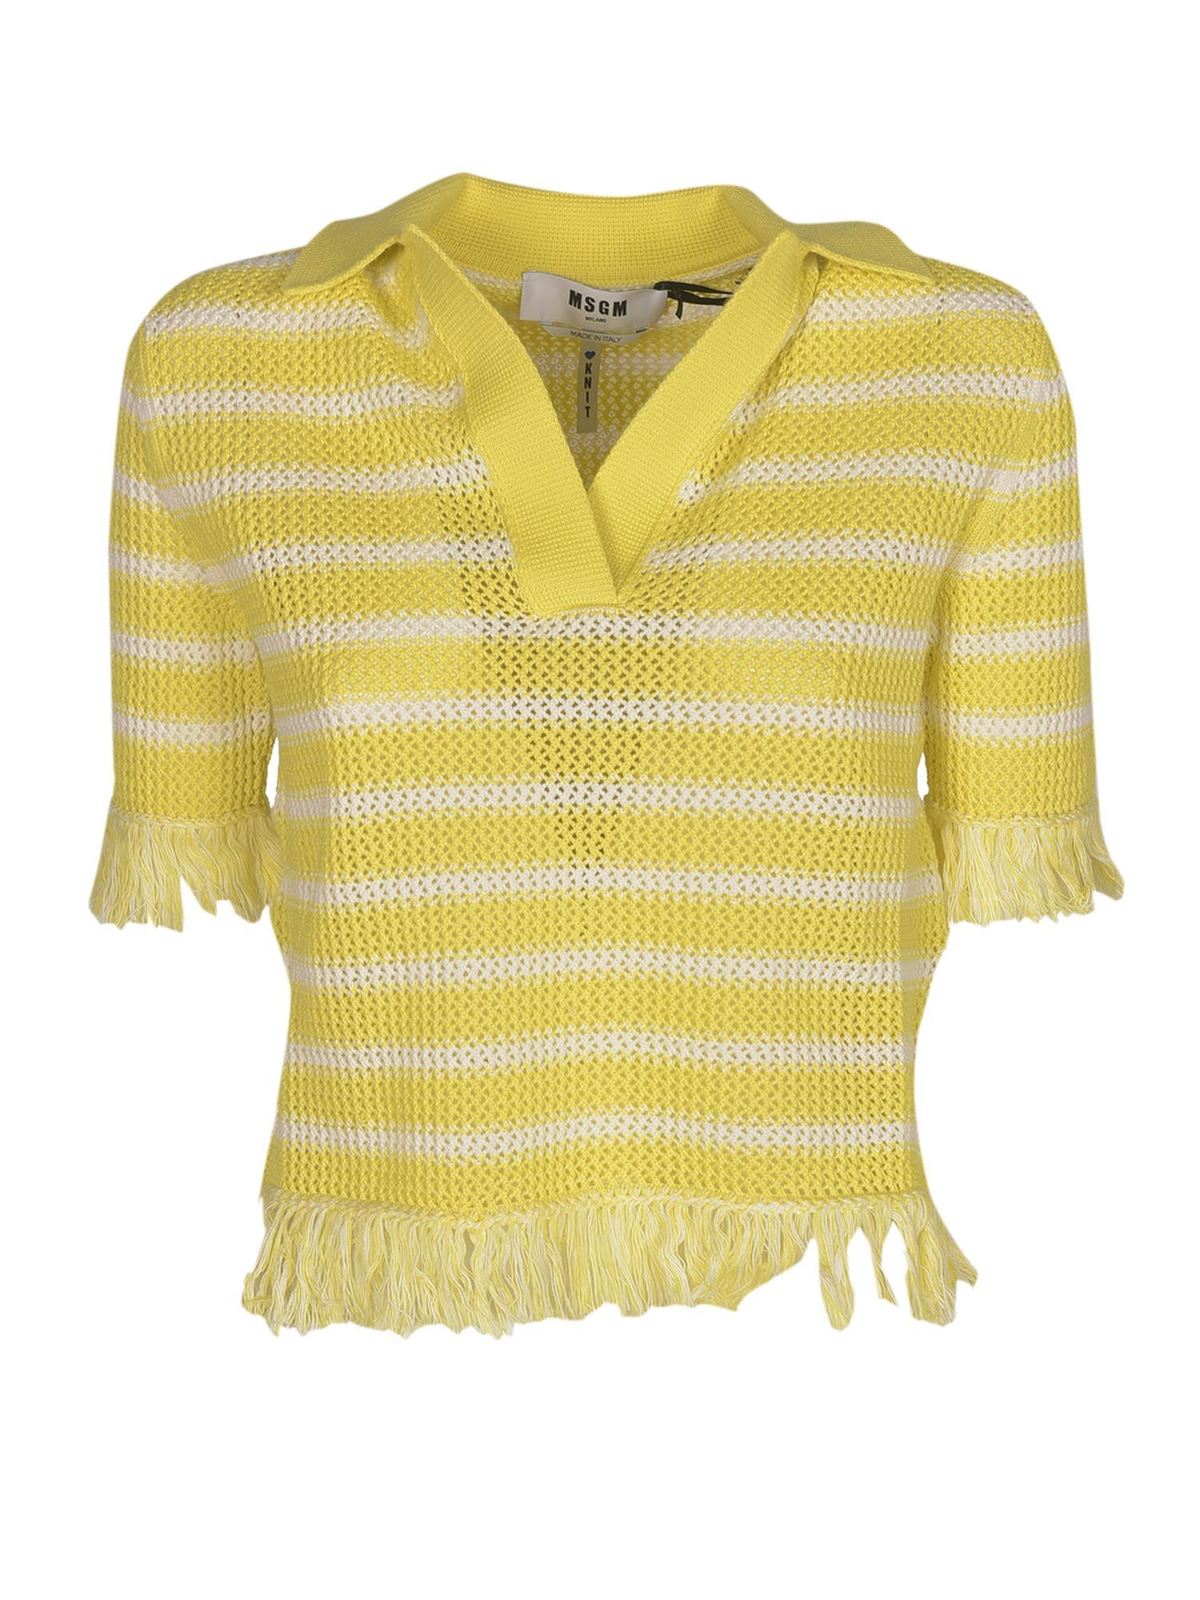 MSGM FRINGED SWEATER IN YELLOW